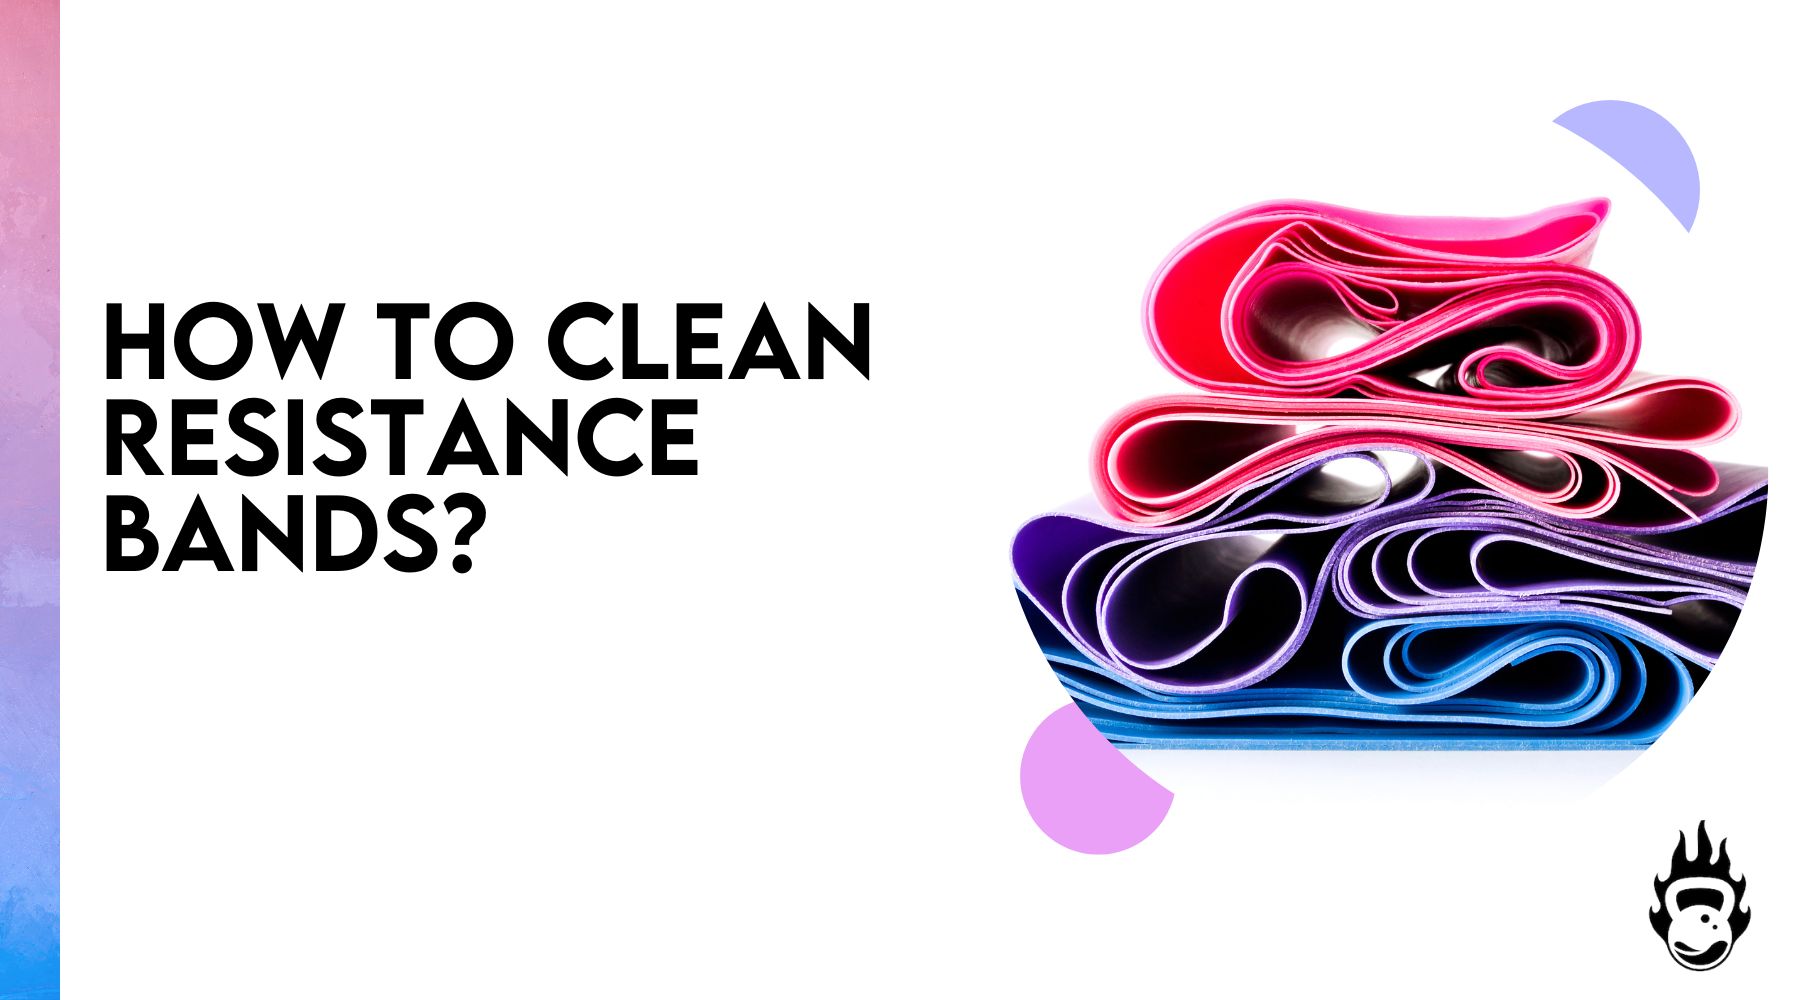 How to clean resistance bands